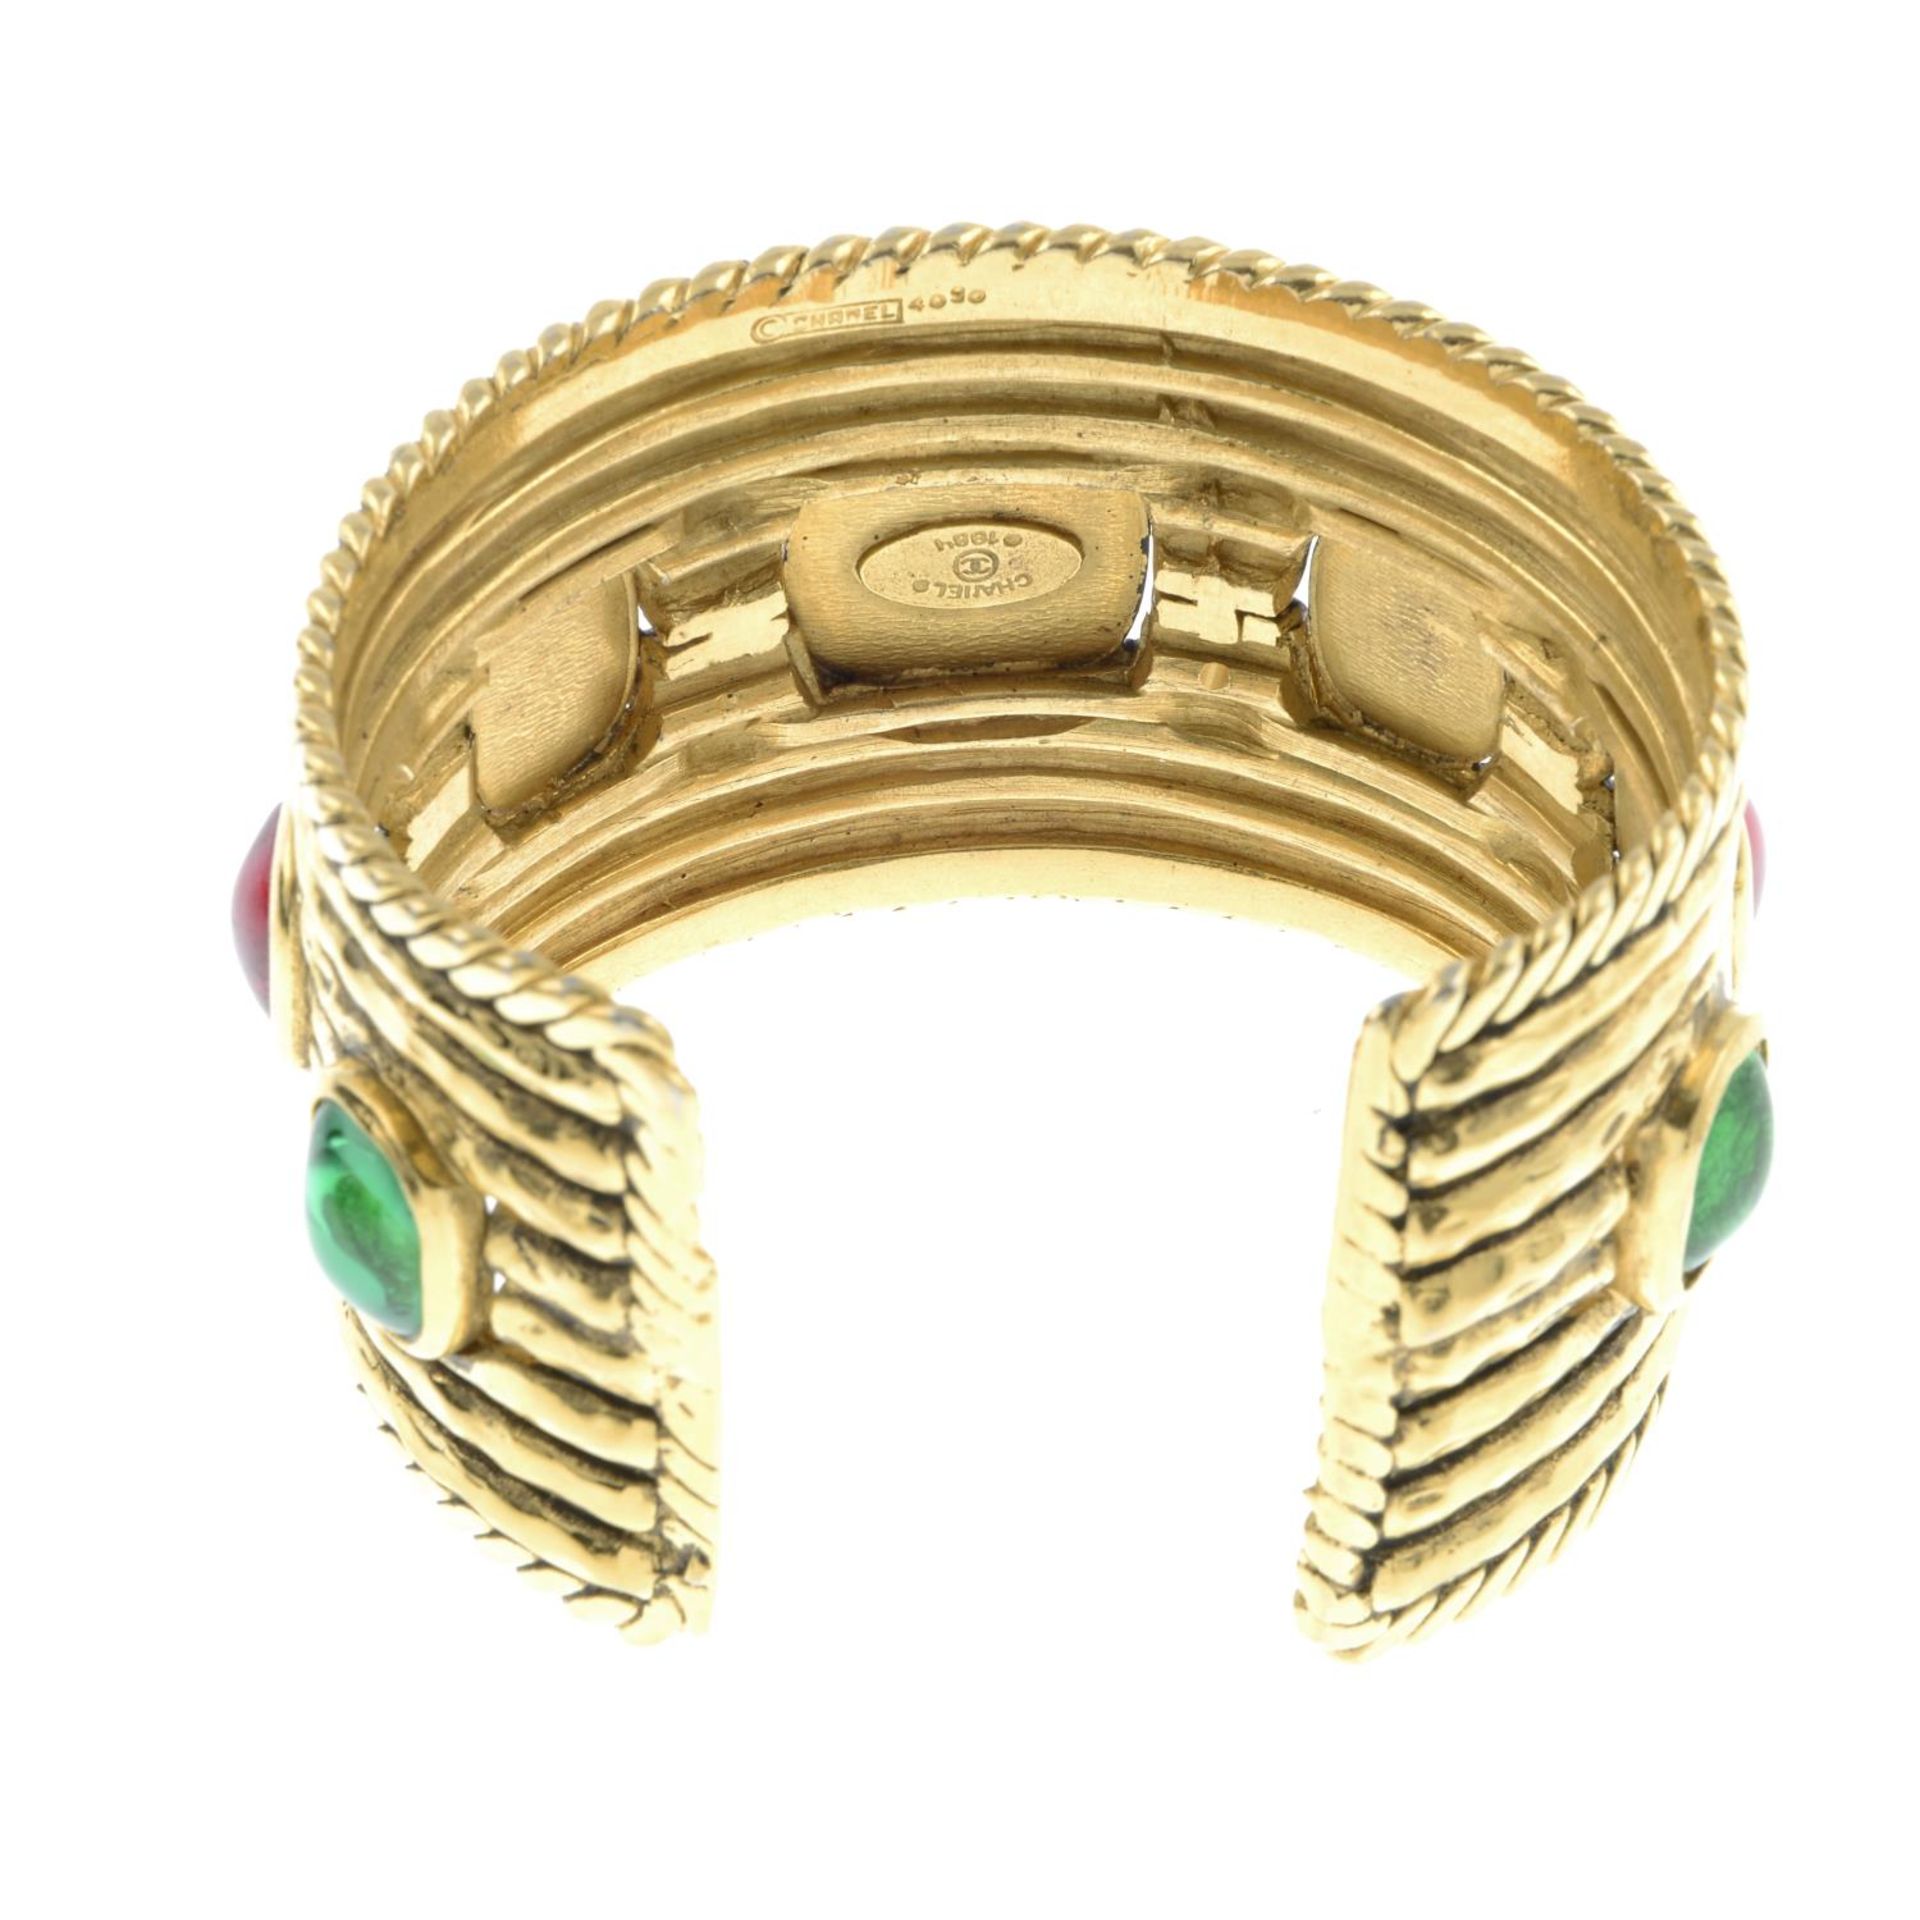 CHANEL - a 90's gold-plated Gripoix Cuff bracelet. - Image 2 of 3